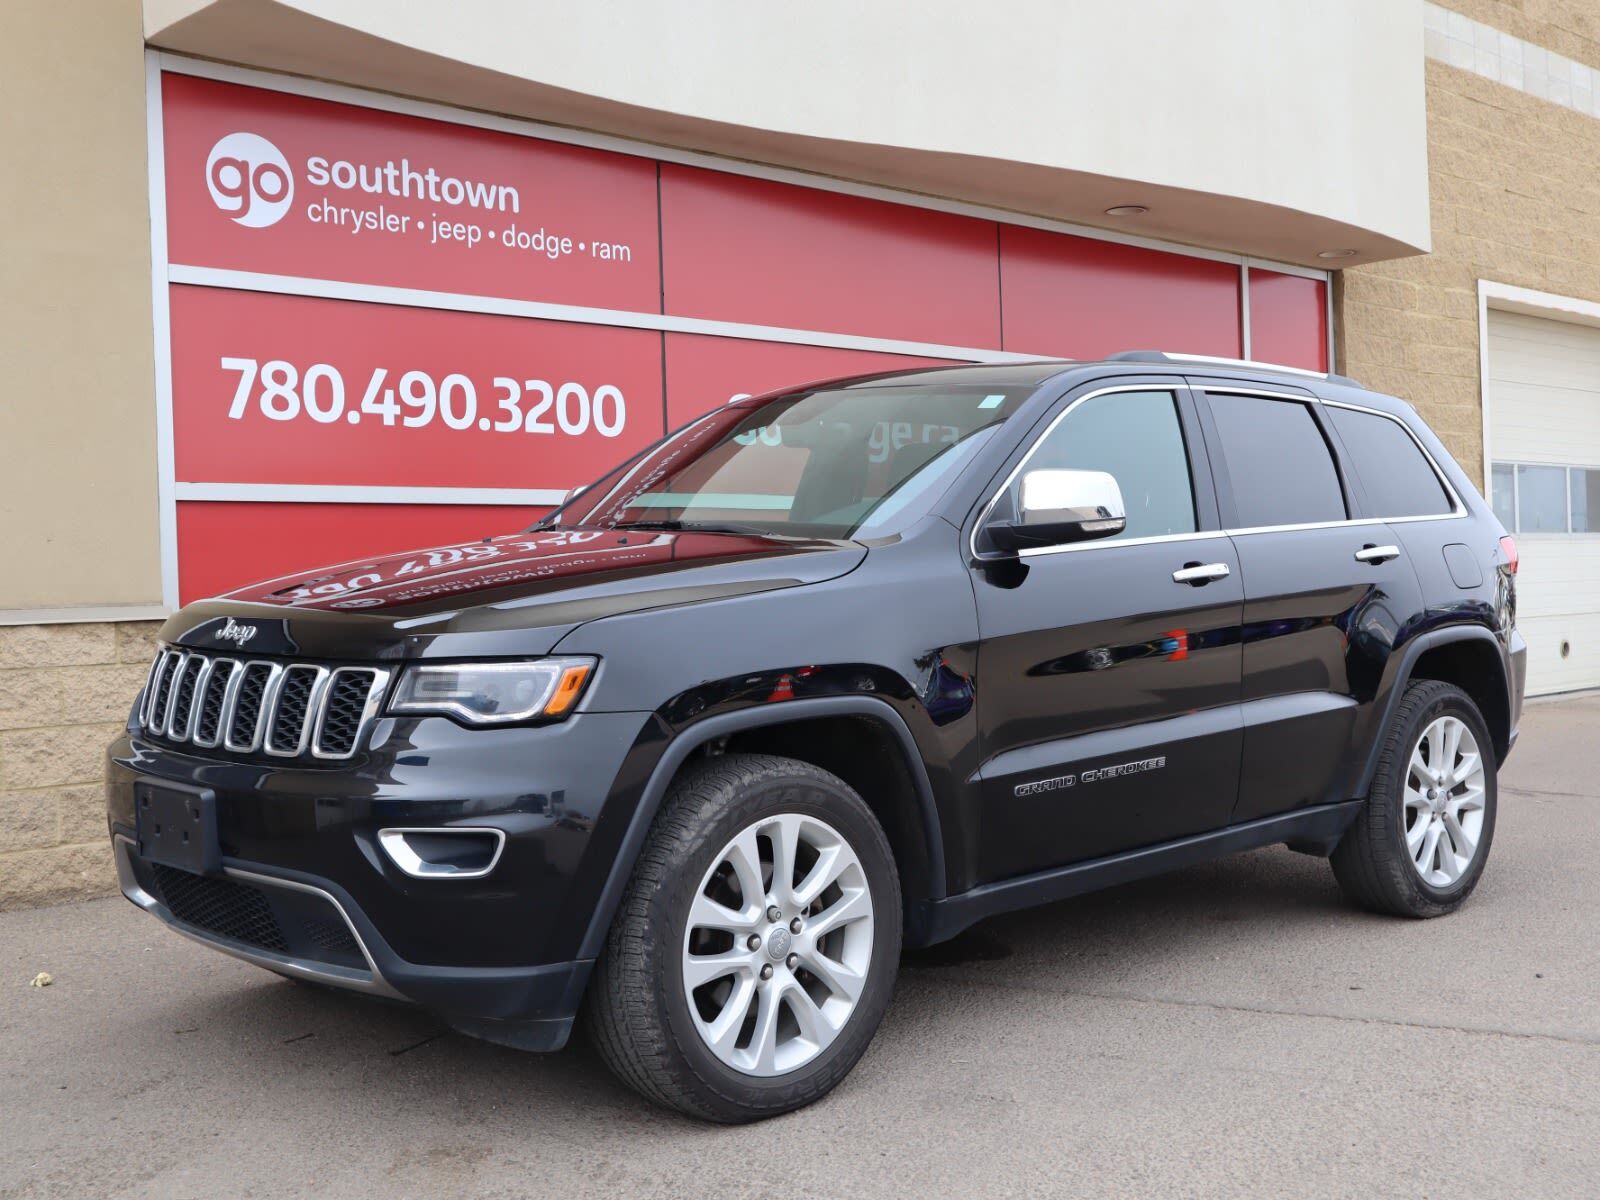 2017 Jeep Grand Cherokee LIMITED IN DIAMOND BLACK EQUIPPED WITH A 3.6L V6 ,